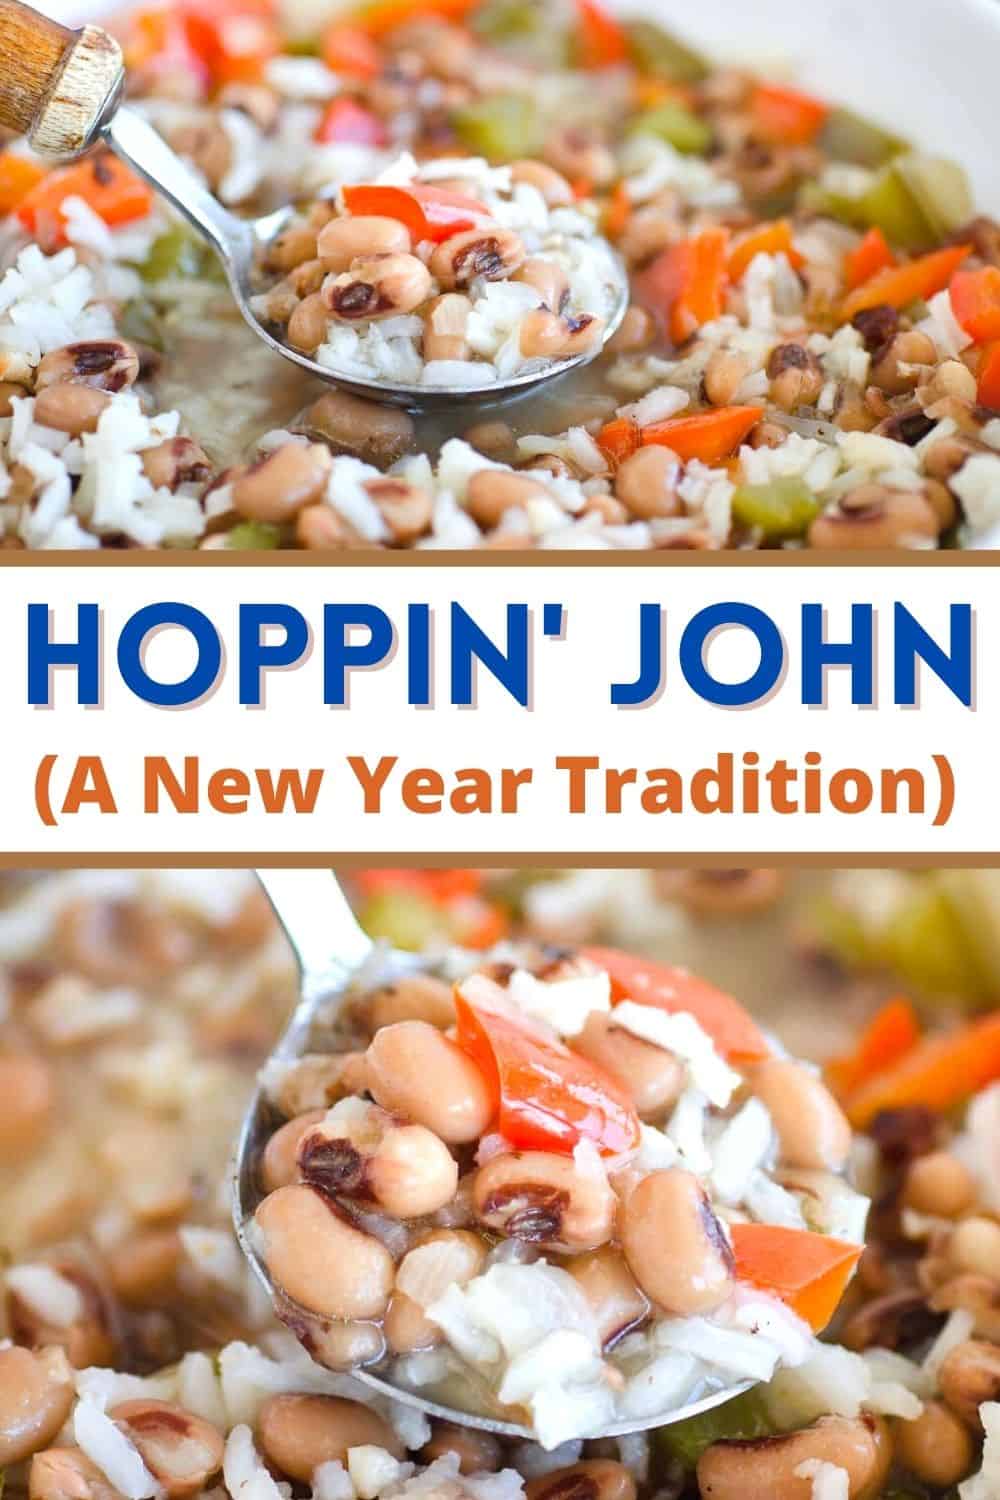 Hoppin' John is a Southern tradition for new years dinner with black eyed peas and rice.  Made with a smoky ham hock or salt pork, this black eyed pea soup is believed by some to bring good luck!